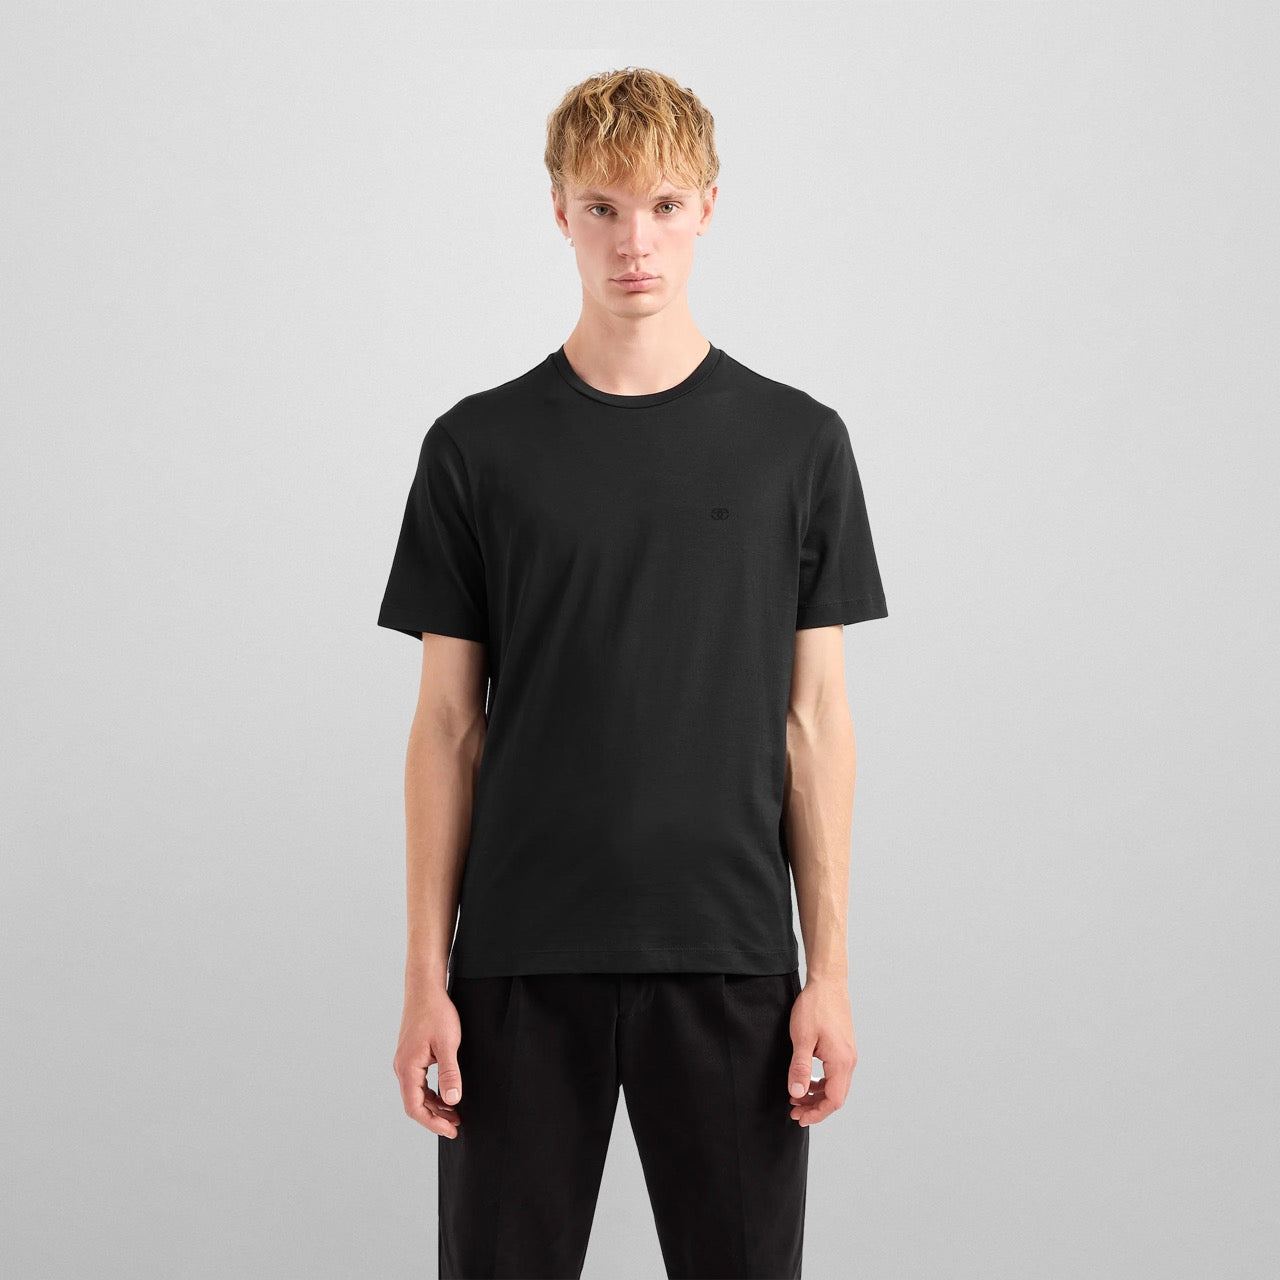 Relaxed Fit Crewneck Hydrophobic T-Shirt